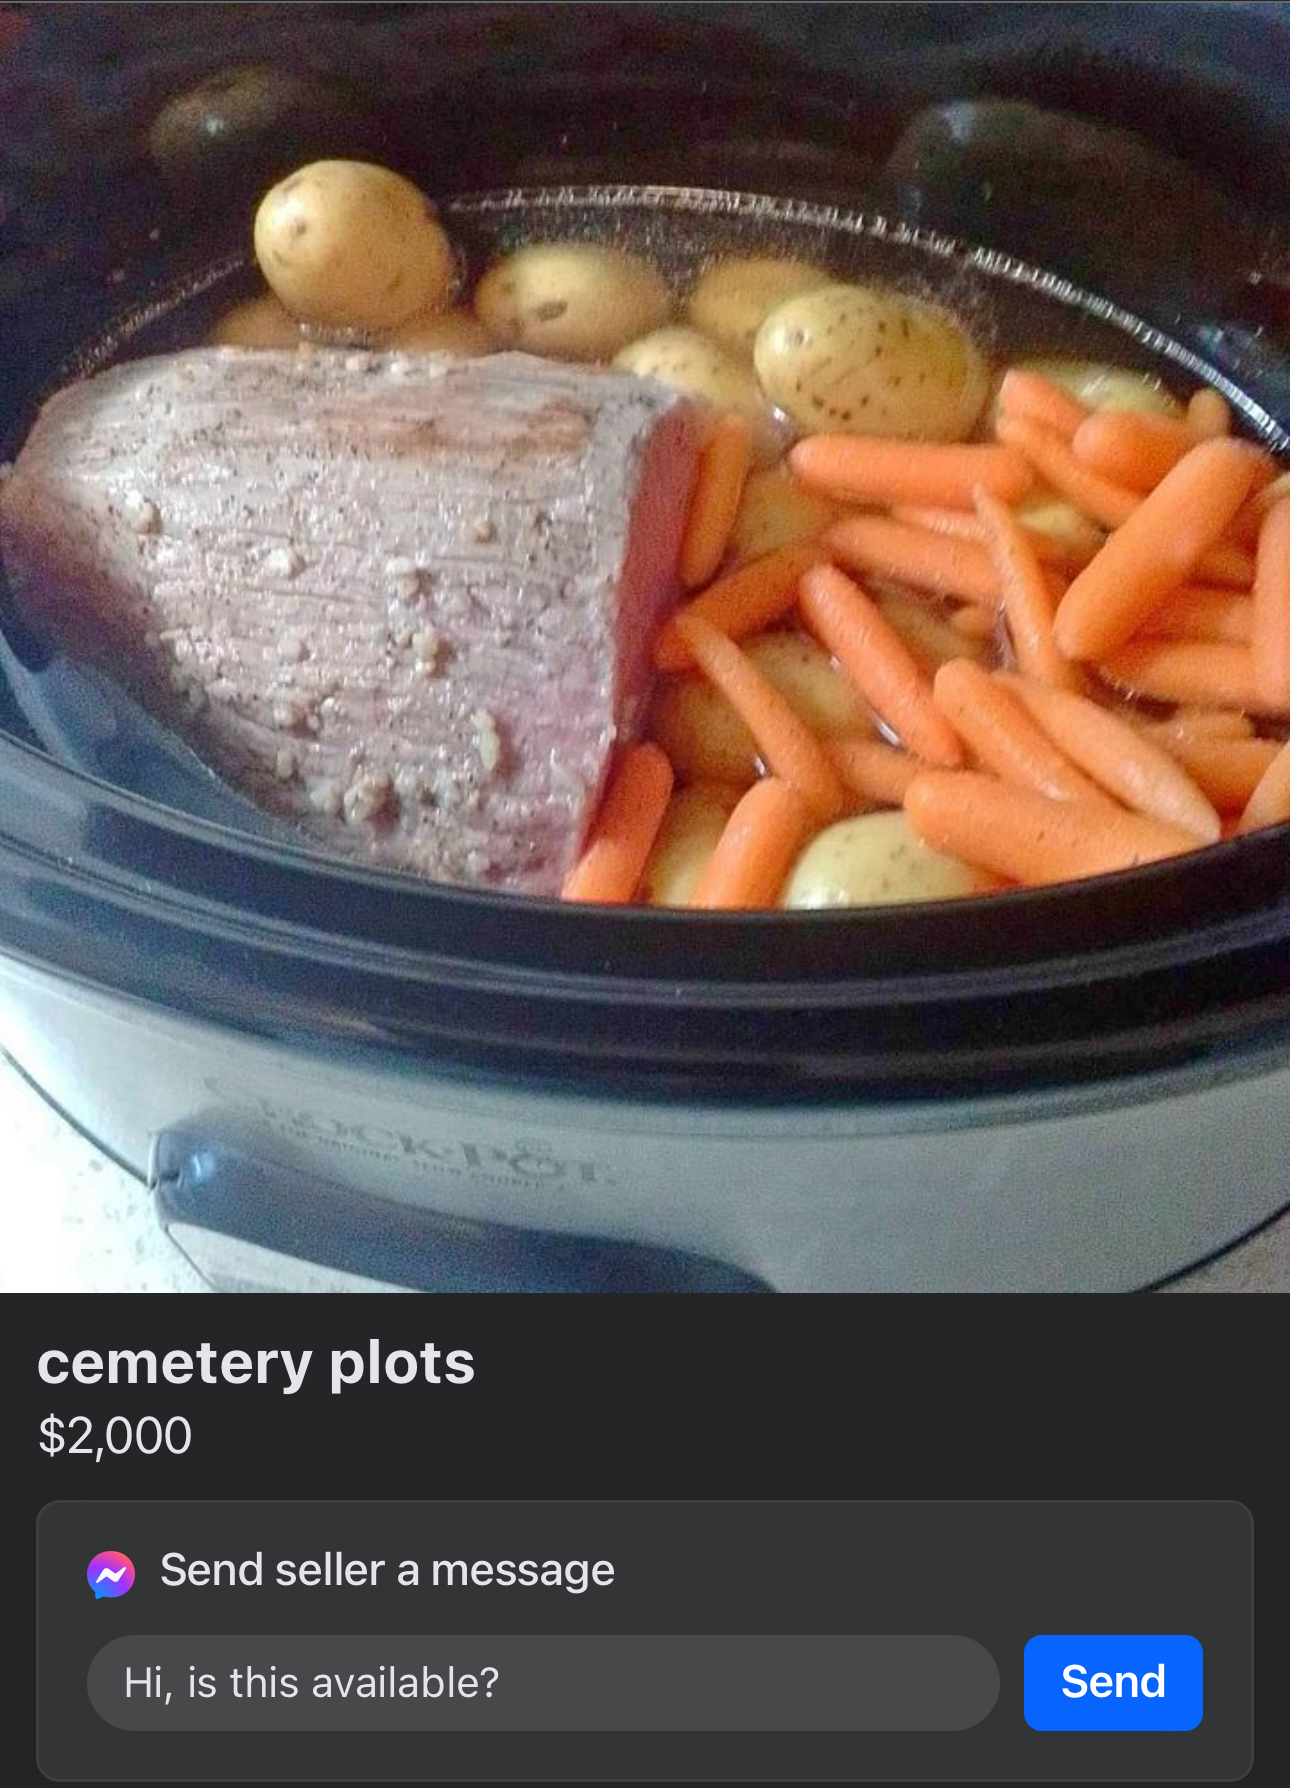 A slow cooker containing a large piece of meat, carrots, and potatoes. Below the image is a listing for “cemetery plots” priced at $2,000, with an option to send the seller a message.